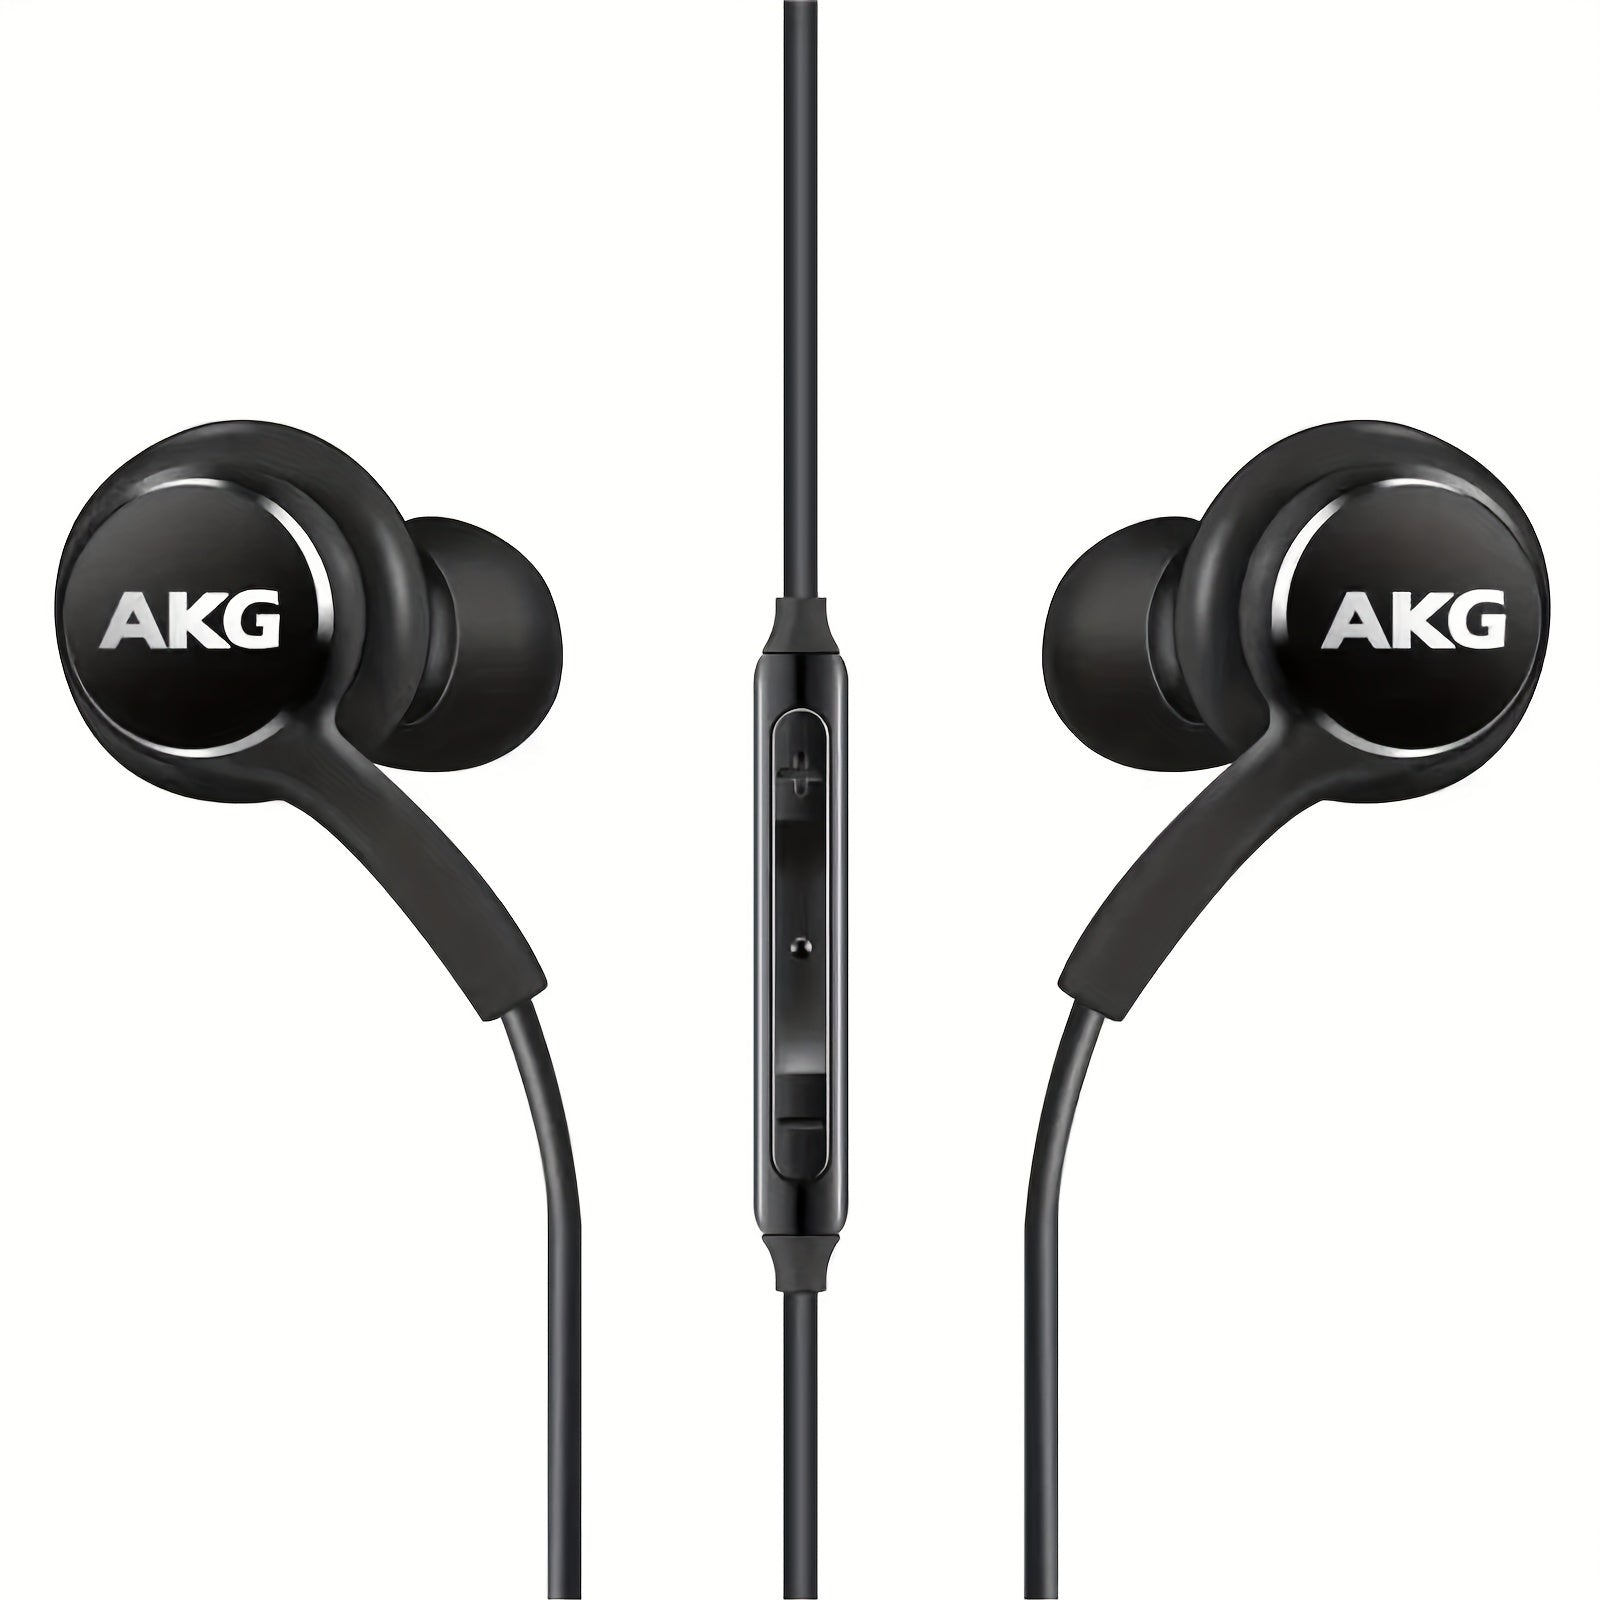 AKG Stereo Headphones For Samsung Galaxy S23 Ultra, Galaxy S22 Ultra, S21 Ultra, S20 Ultra & Note 10+ - Designed By AKG - With Microphone And Volume Remote Control